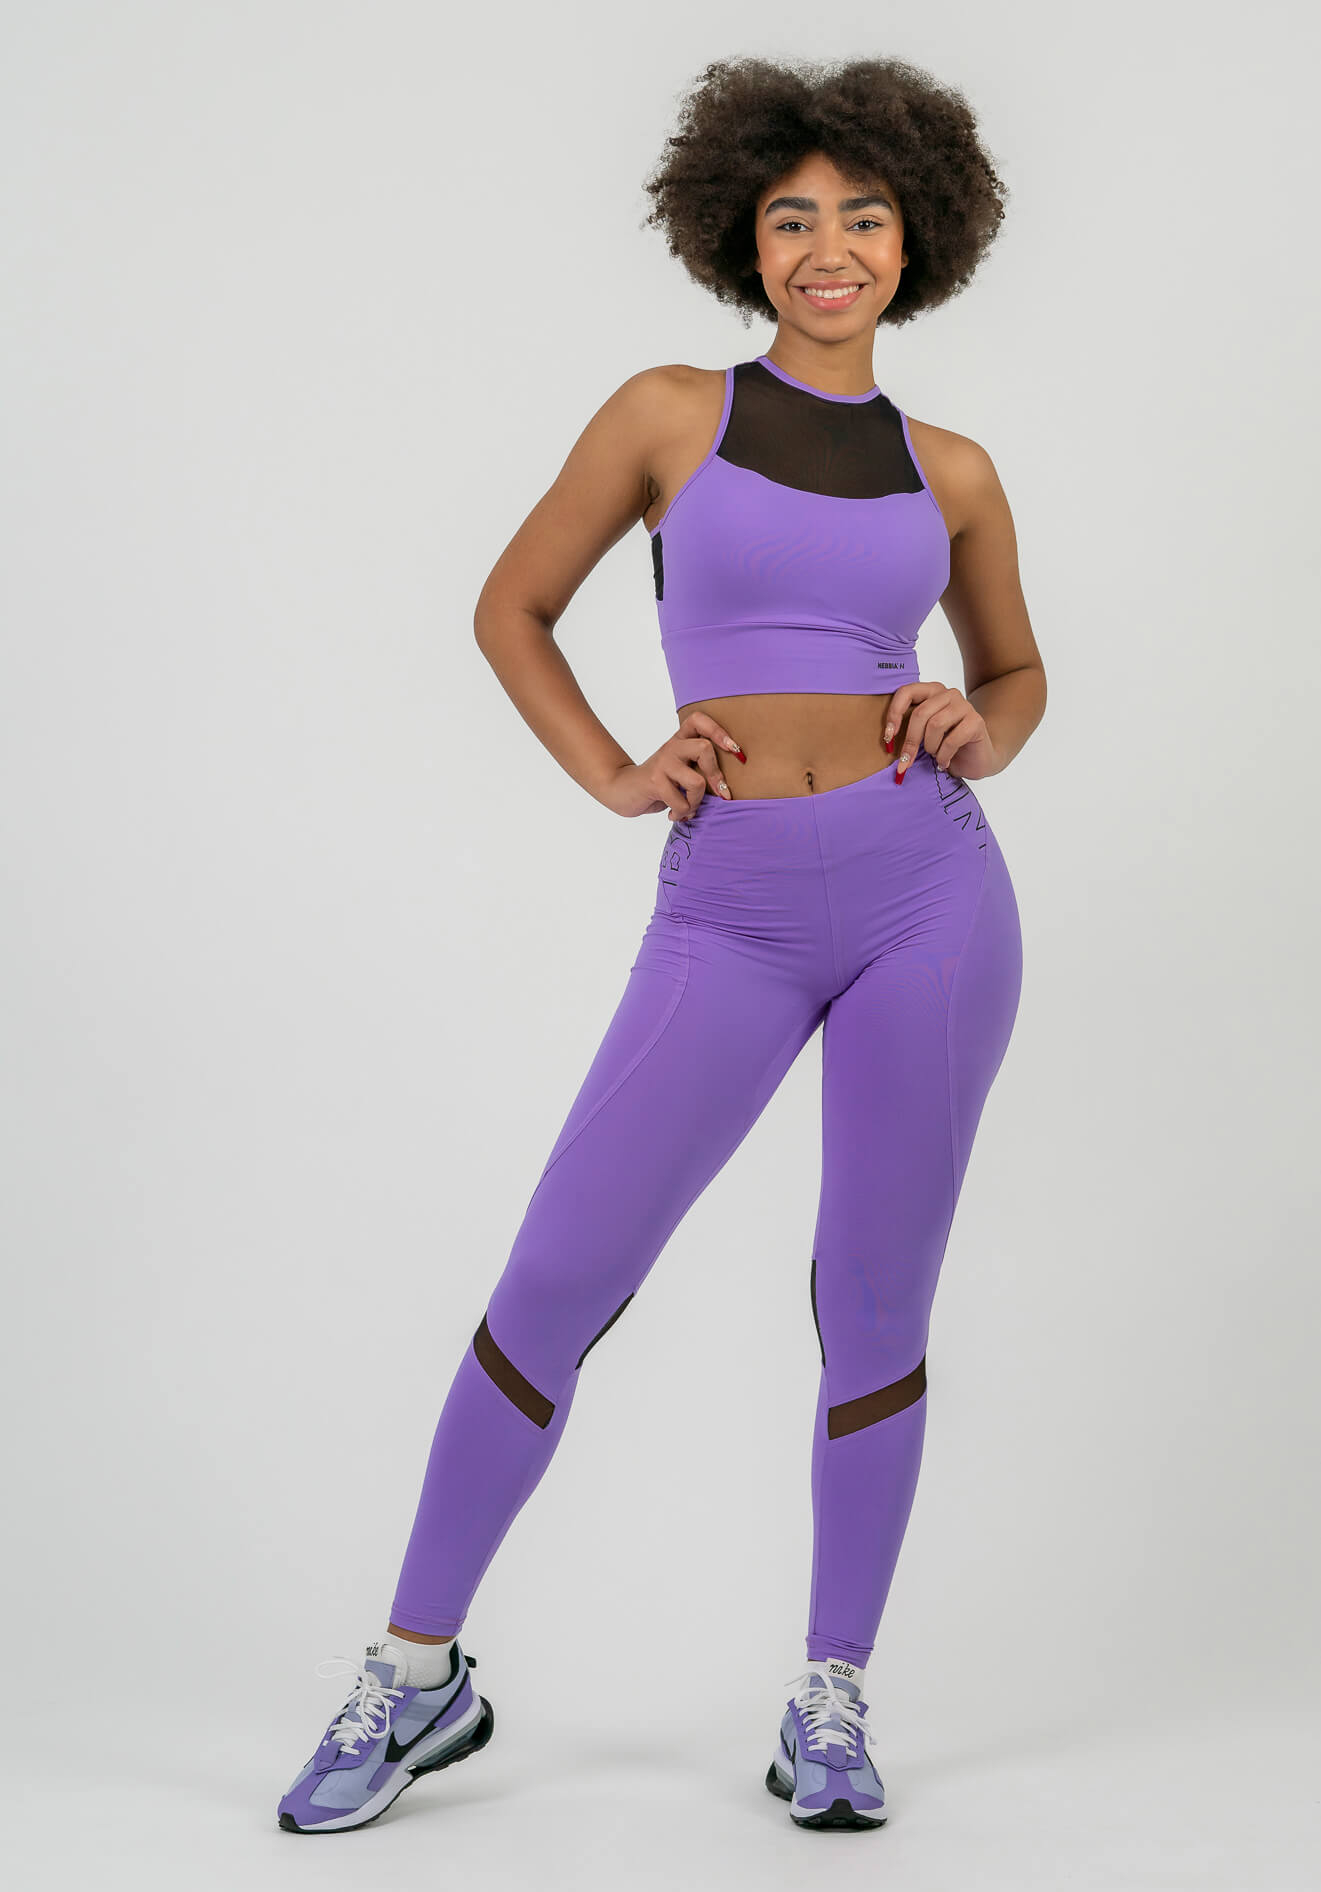 Nebbia - Organic Ribbed Tights - One More Rep